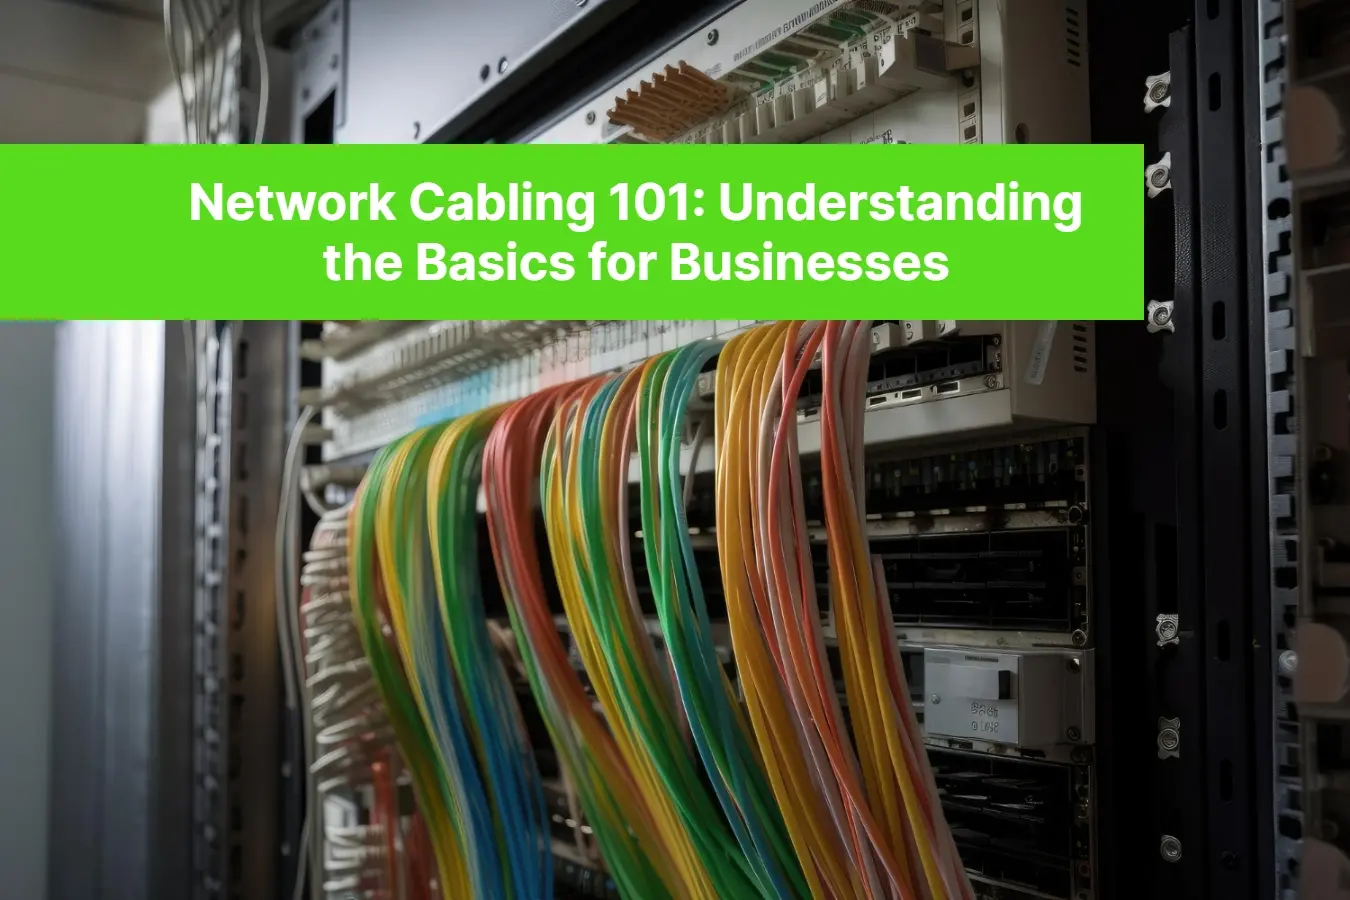 Network Cabling 101 Understanding the Basics for Businesses